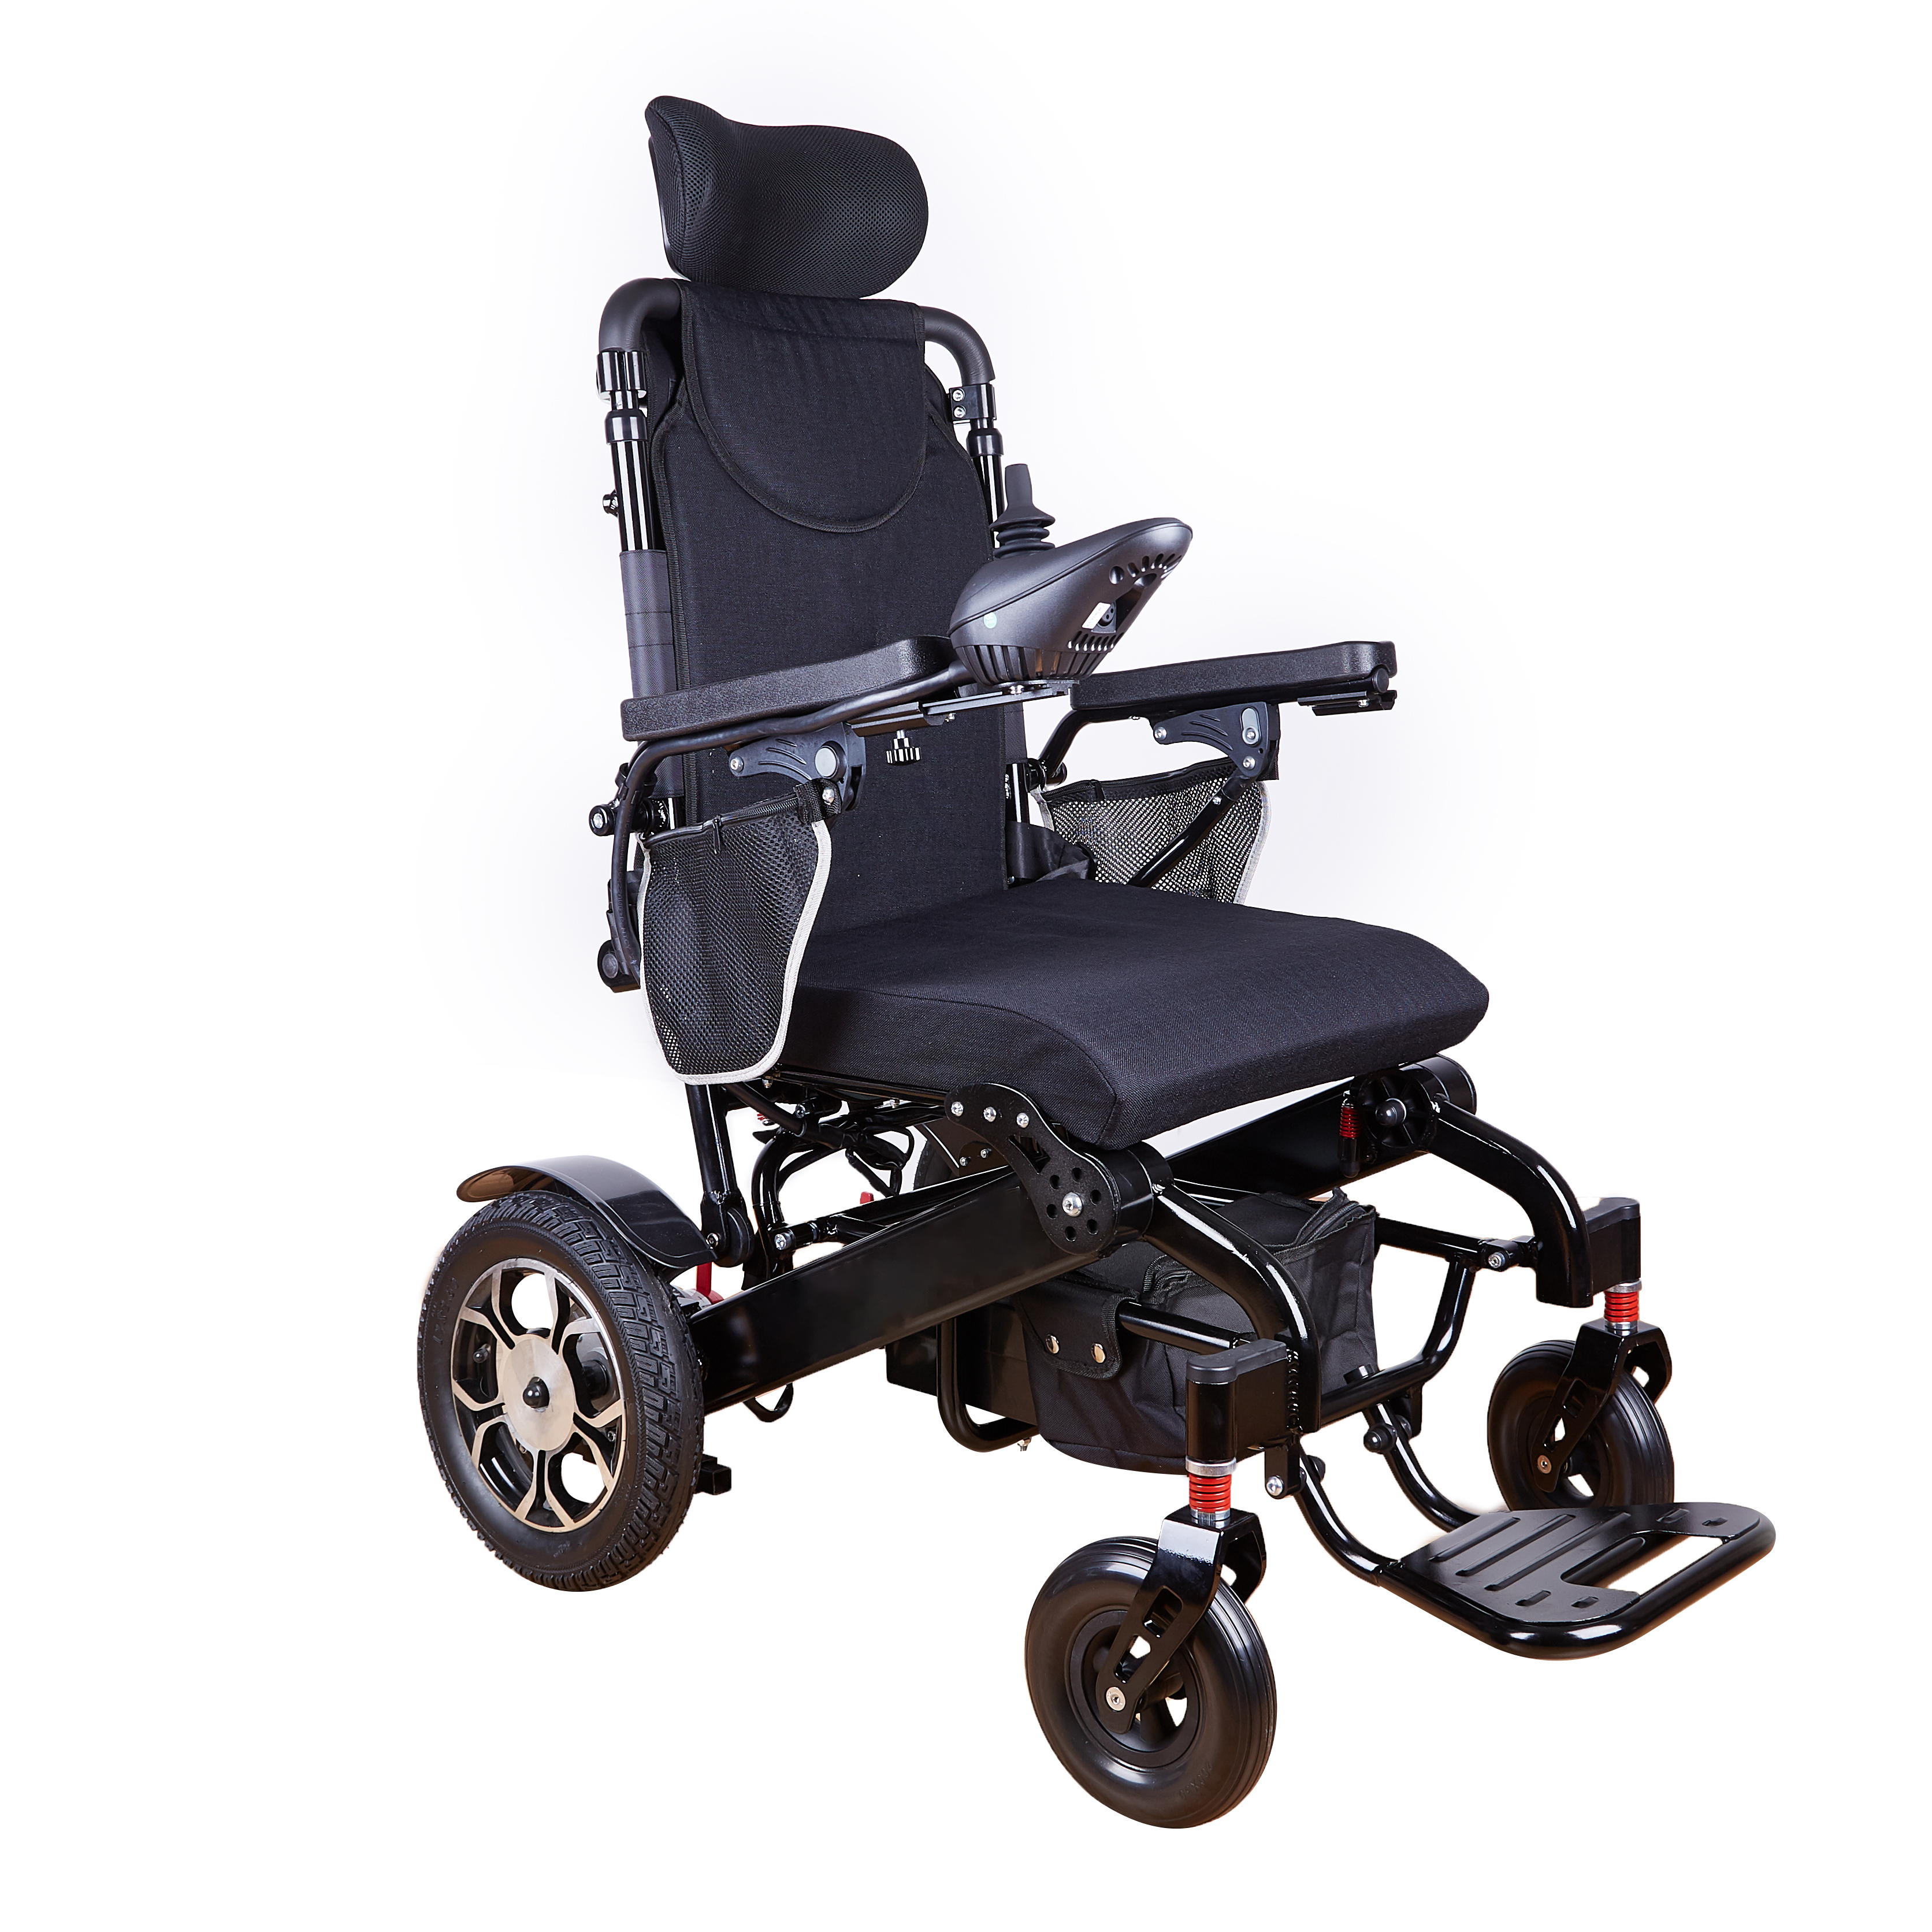 Folding Automatic Electronic Motorized Electric Wheelchair Lightweight Power Aluminum Wheelchairs Pakistan for Disabled Price